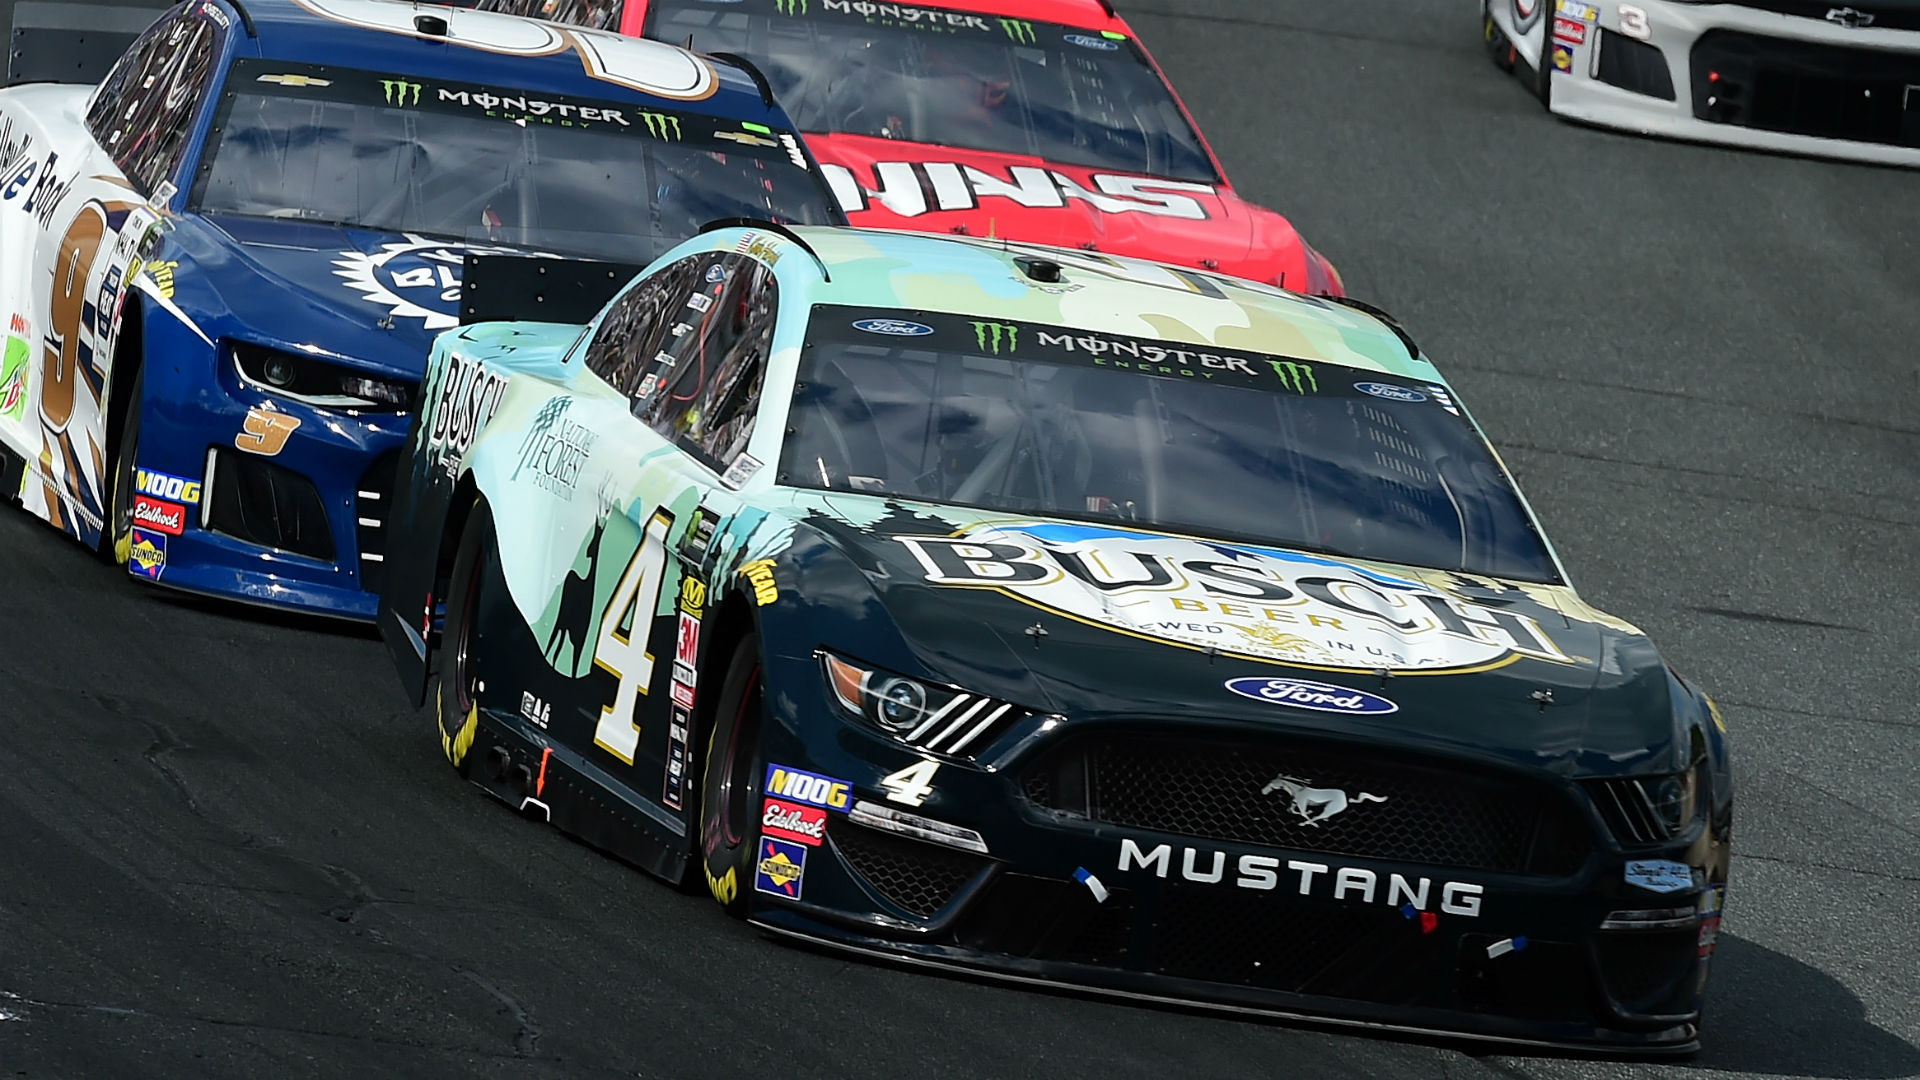 NASCAR results at New Hampshire: Kevin Harvick gets first win of season in Foxwoods Resort Casino 301